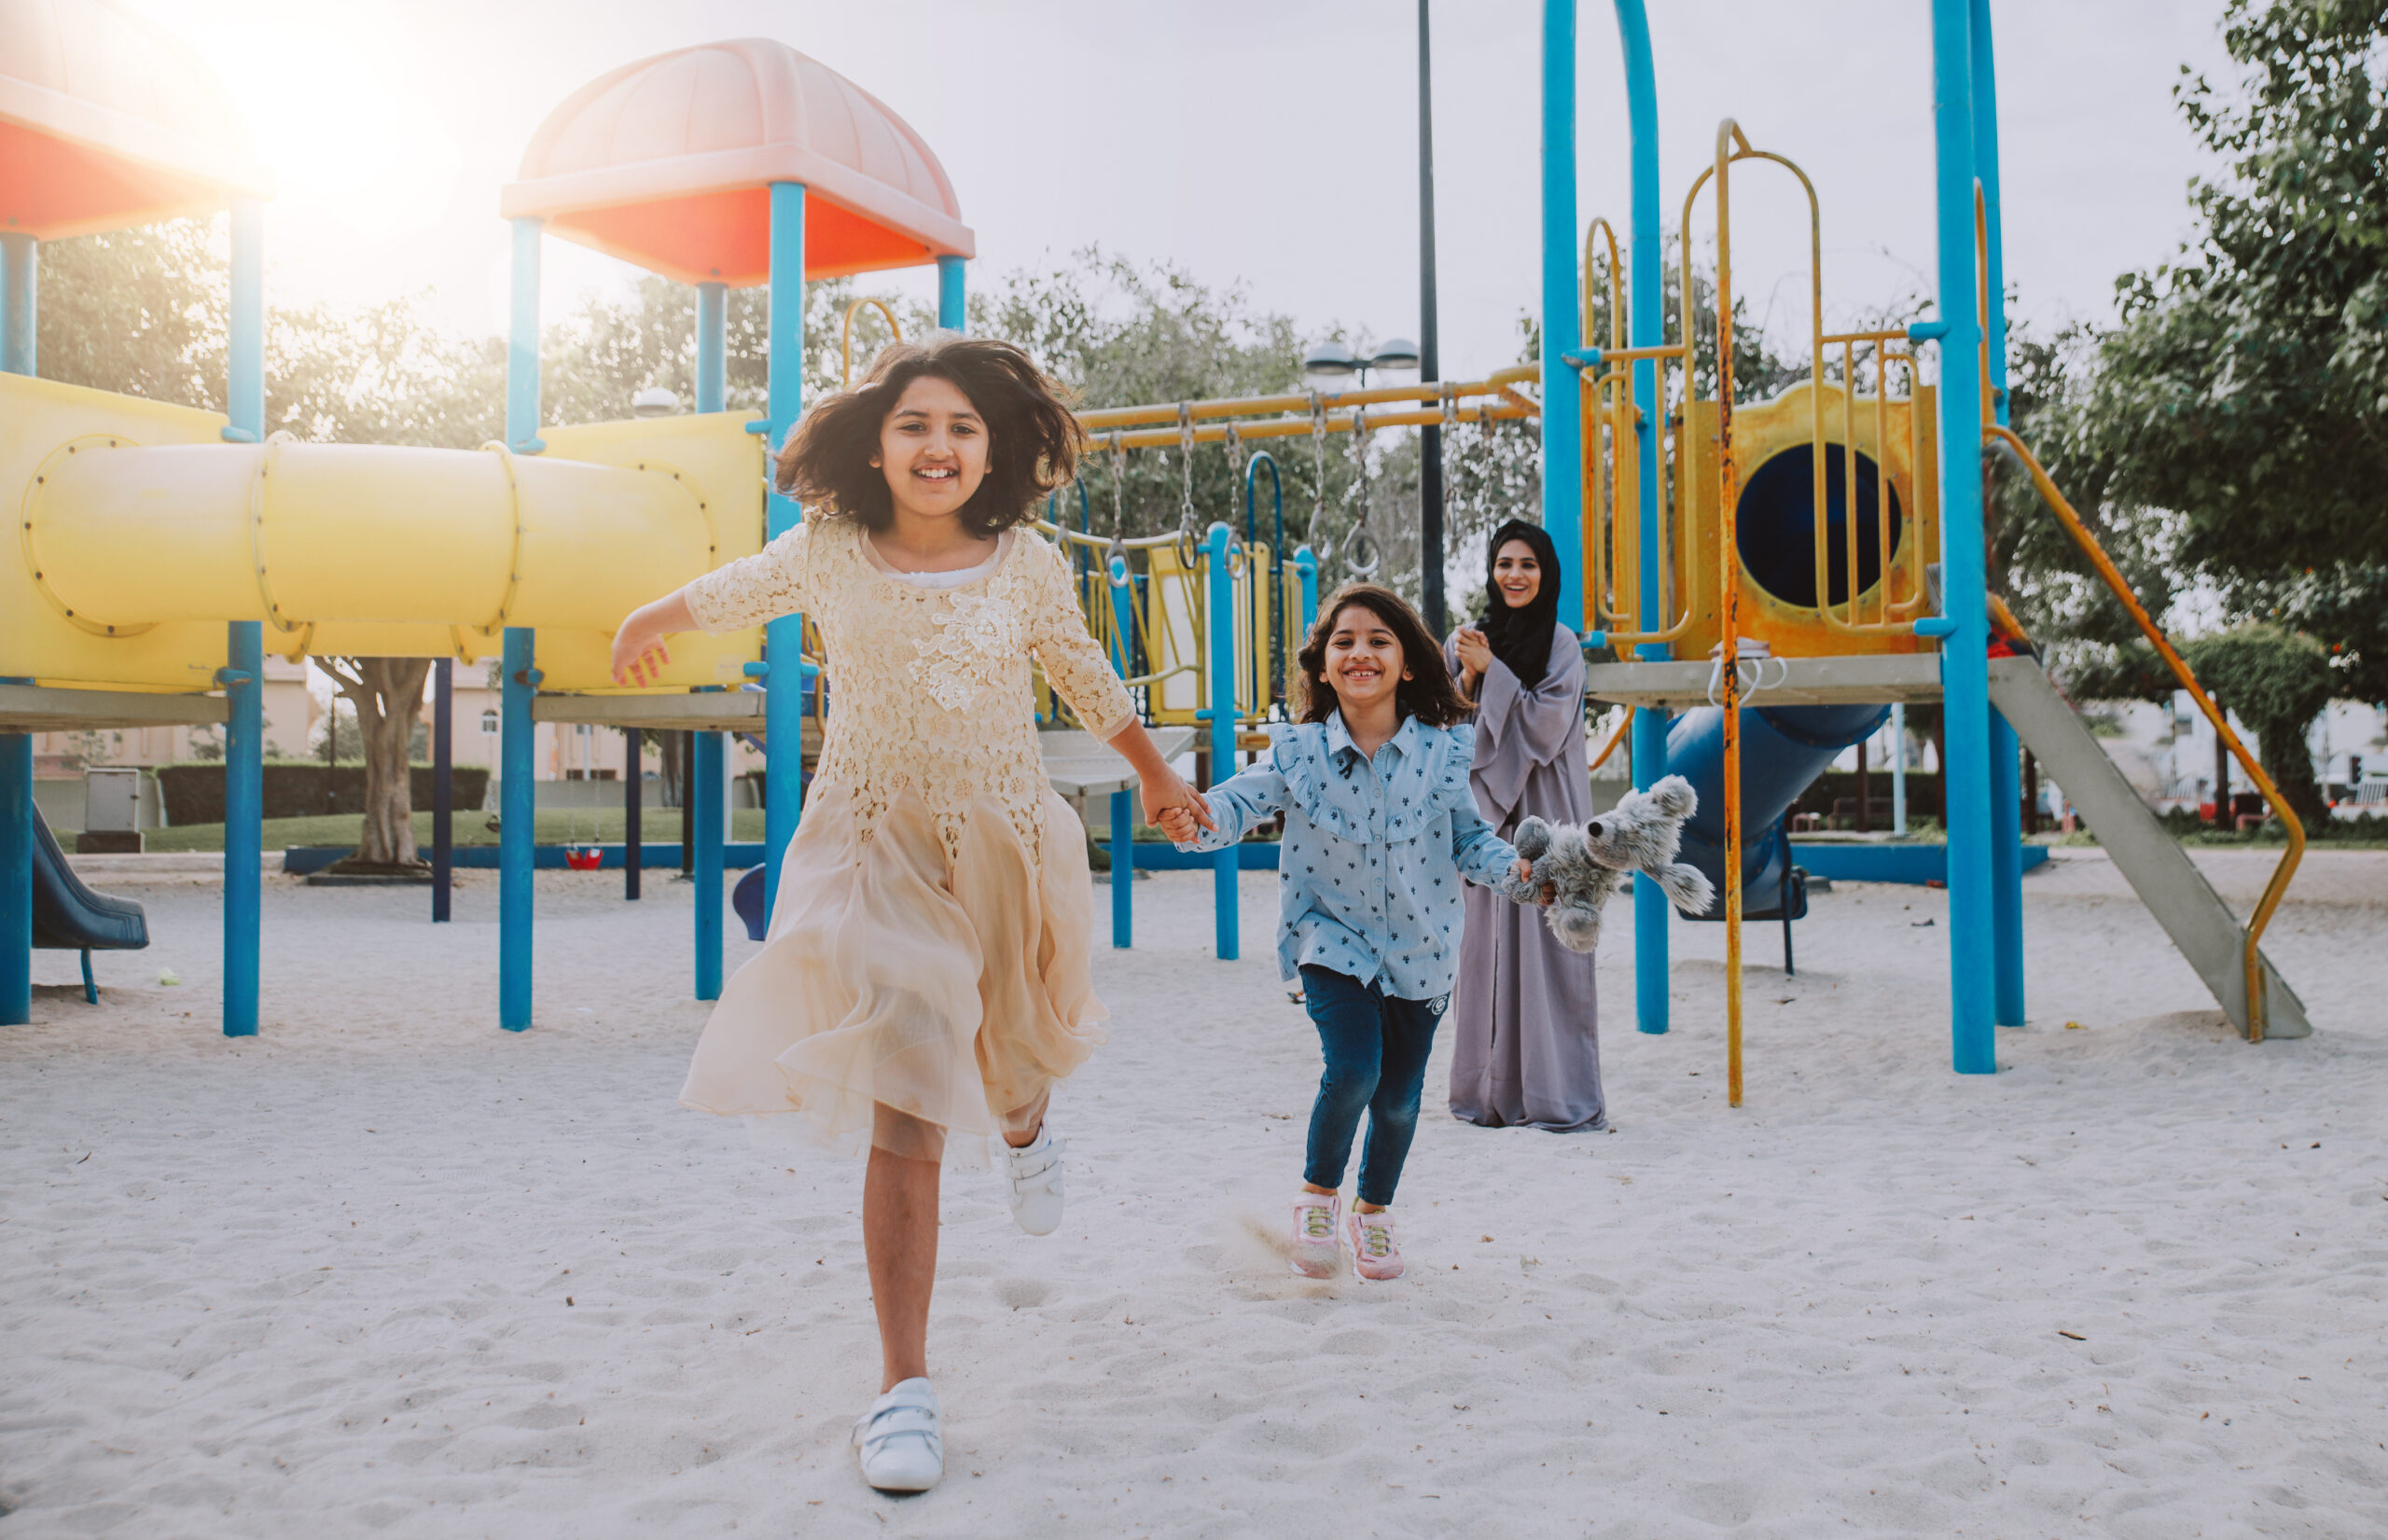 What to do in Dubai with kids - Playground